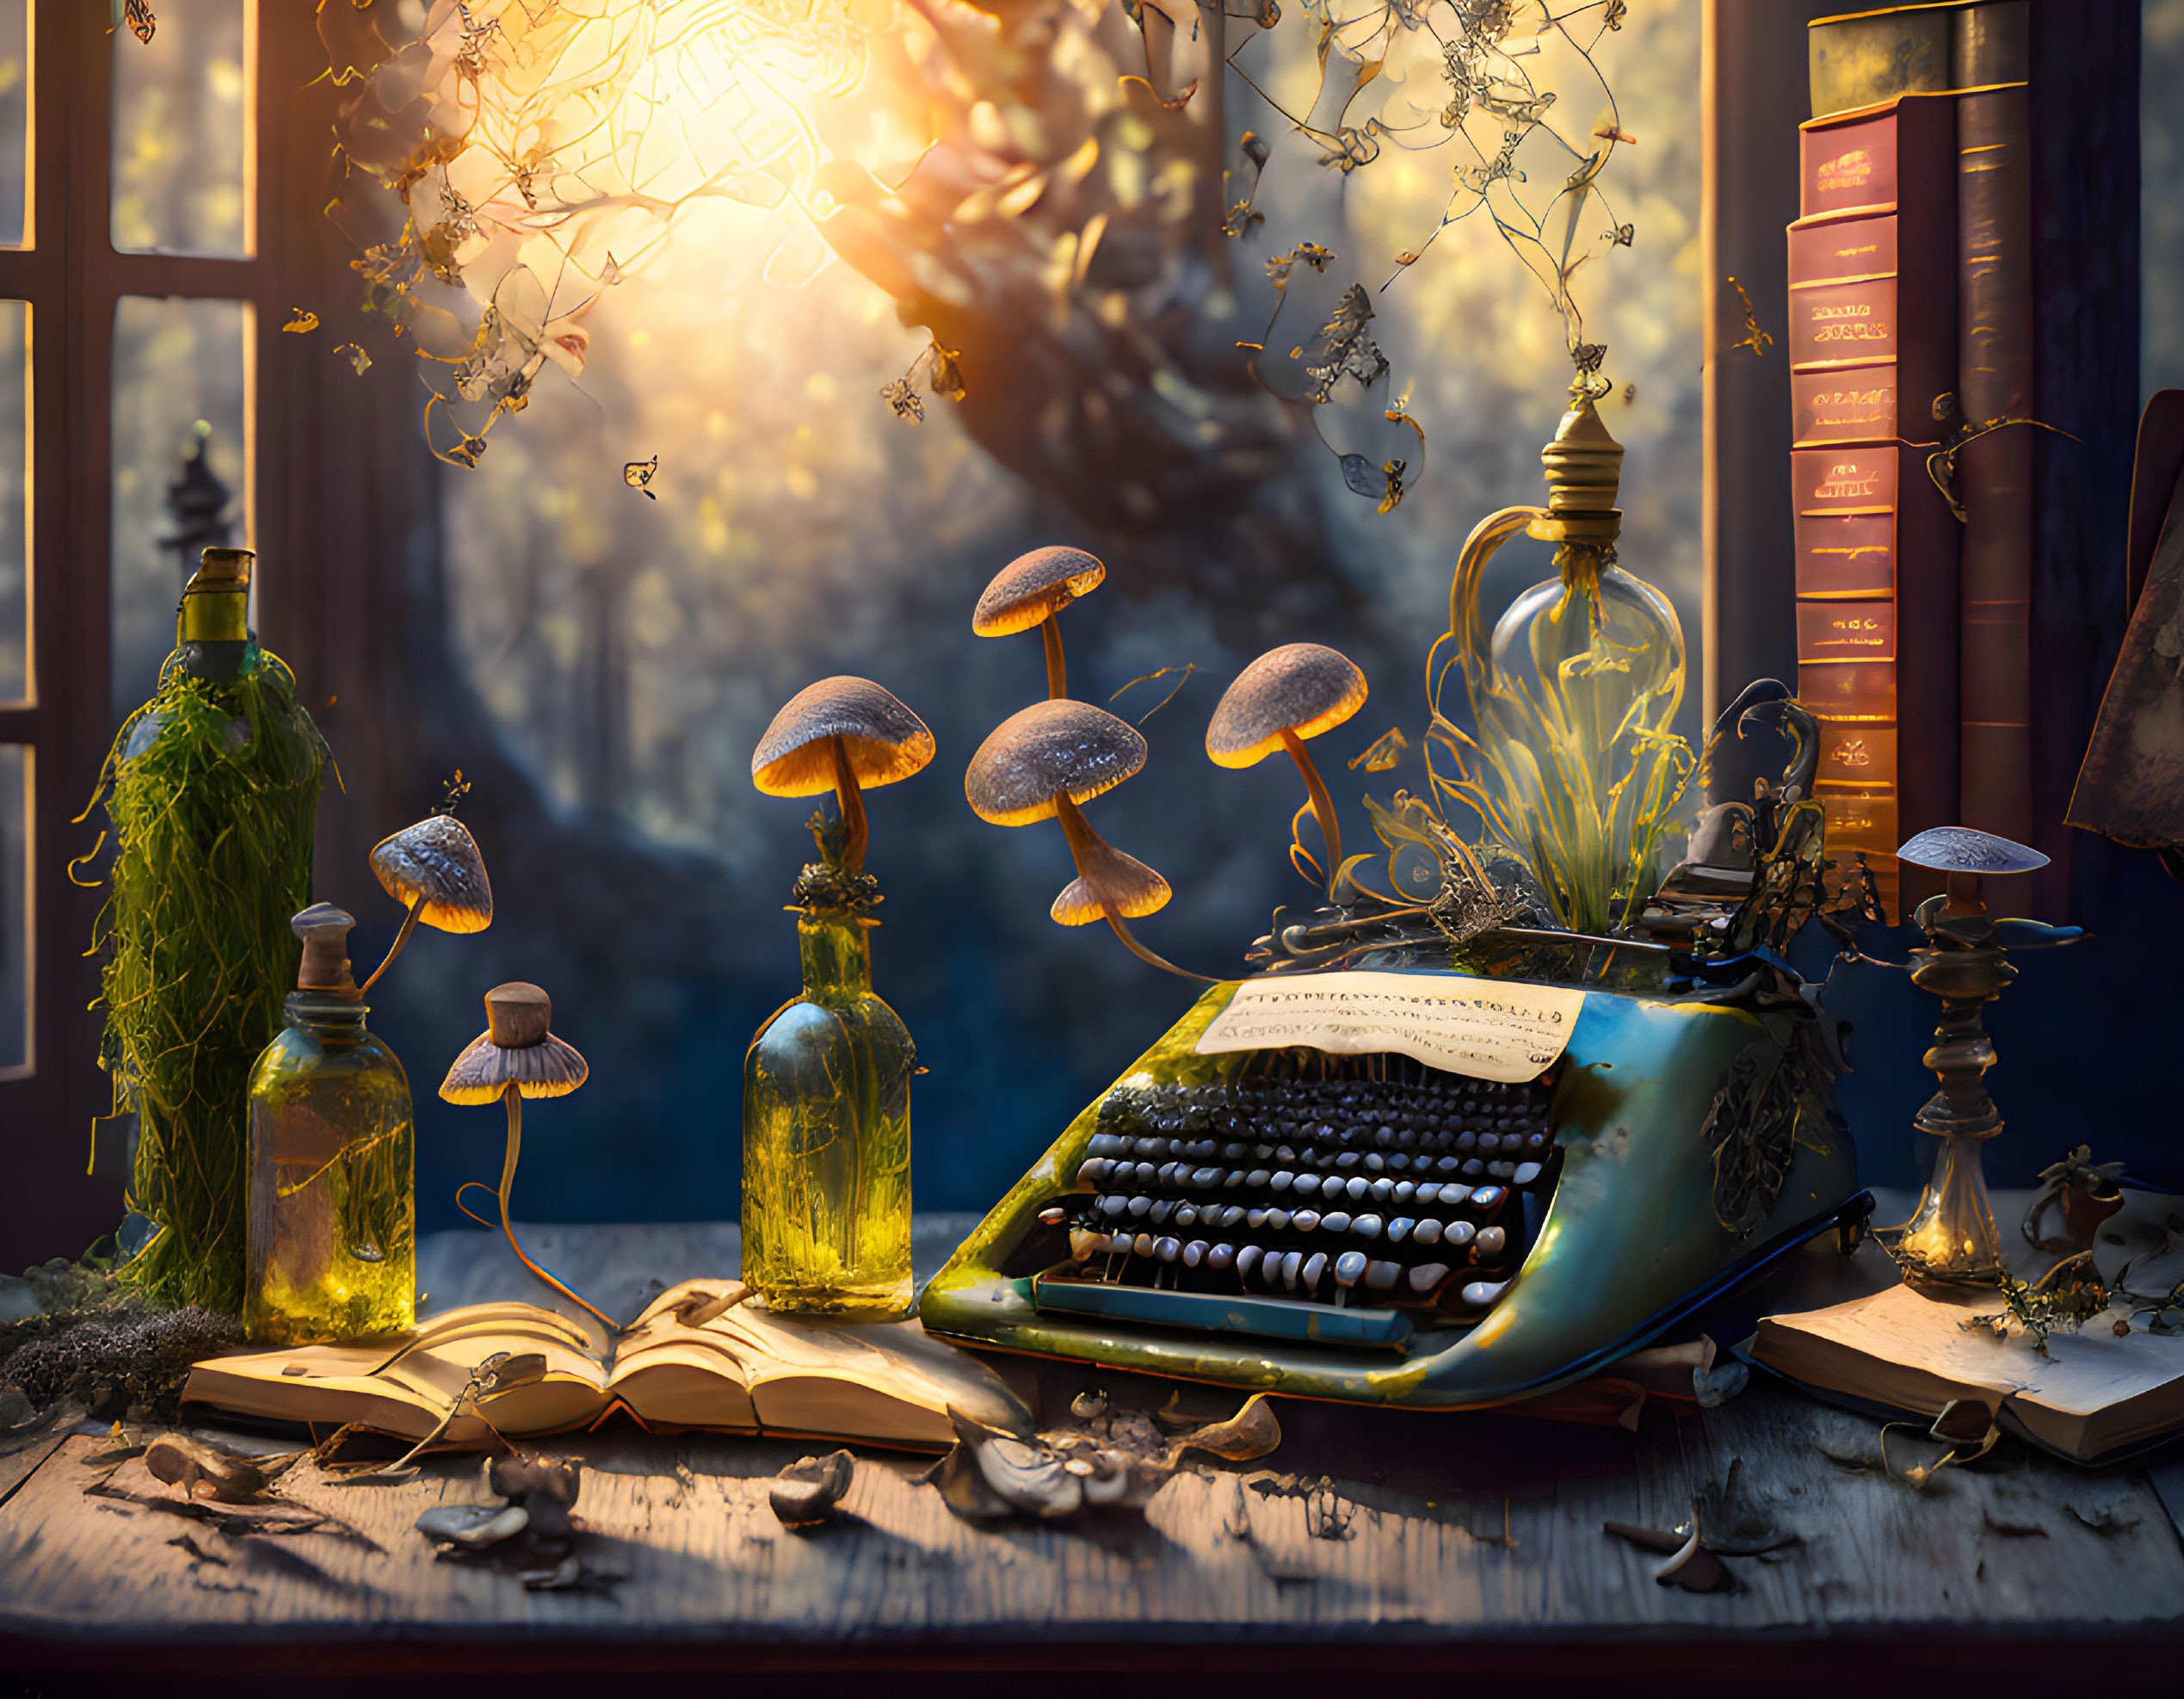 Vintage Typewriter on Desk with Open Book, Glowing Mushrooms, Potion Bottles, and Sunset